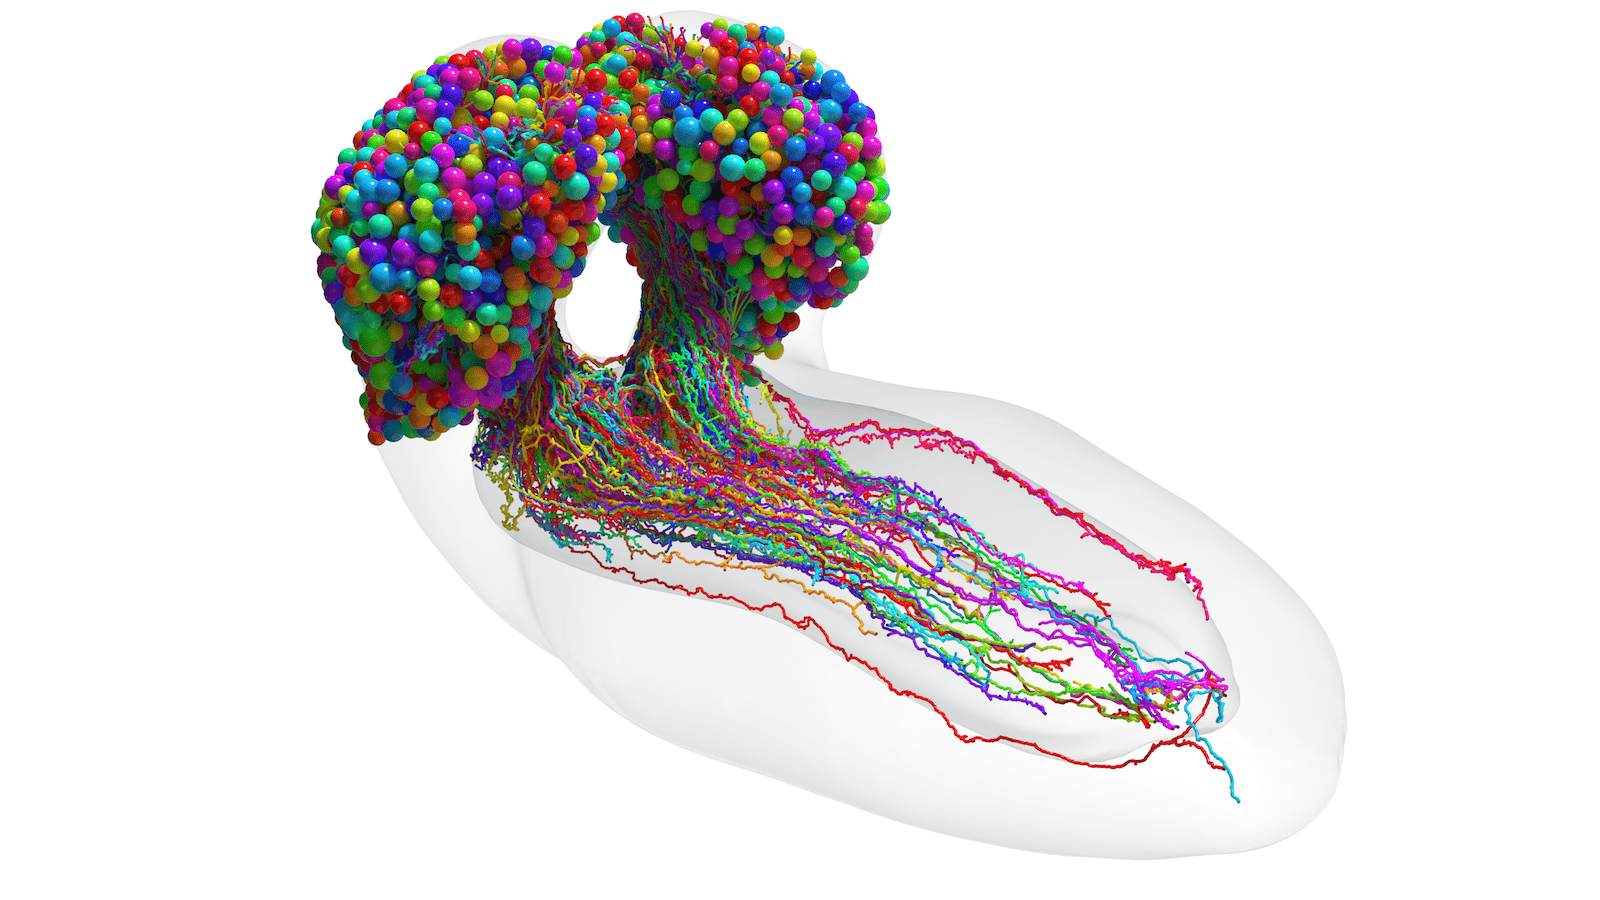 a colorful brain scan of a fruit fly. there are two main lobes bulbous in shape that are filled with colored little balls, which represent neurons. there are long filaments stringing down from the lobes